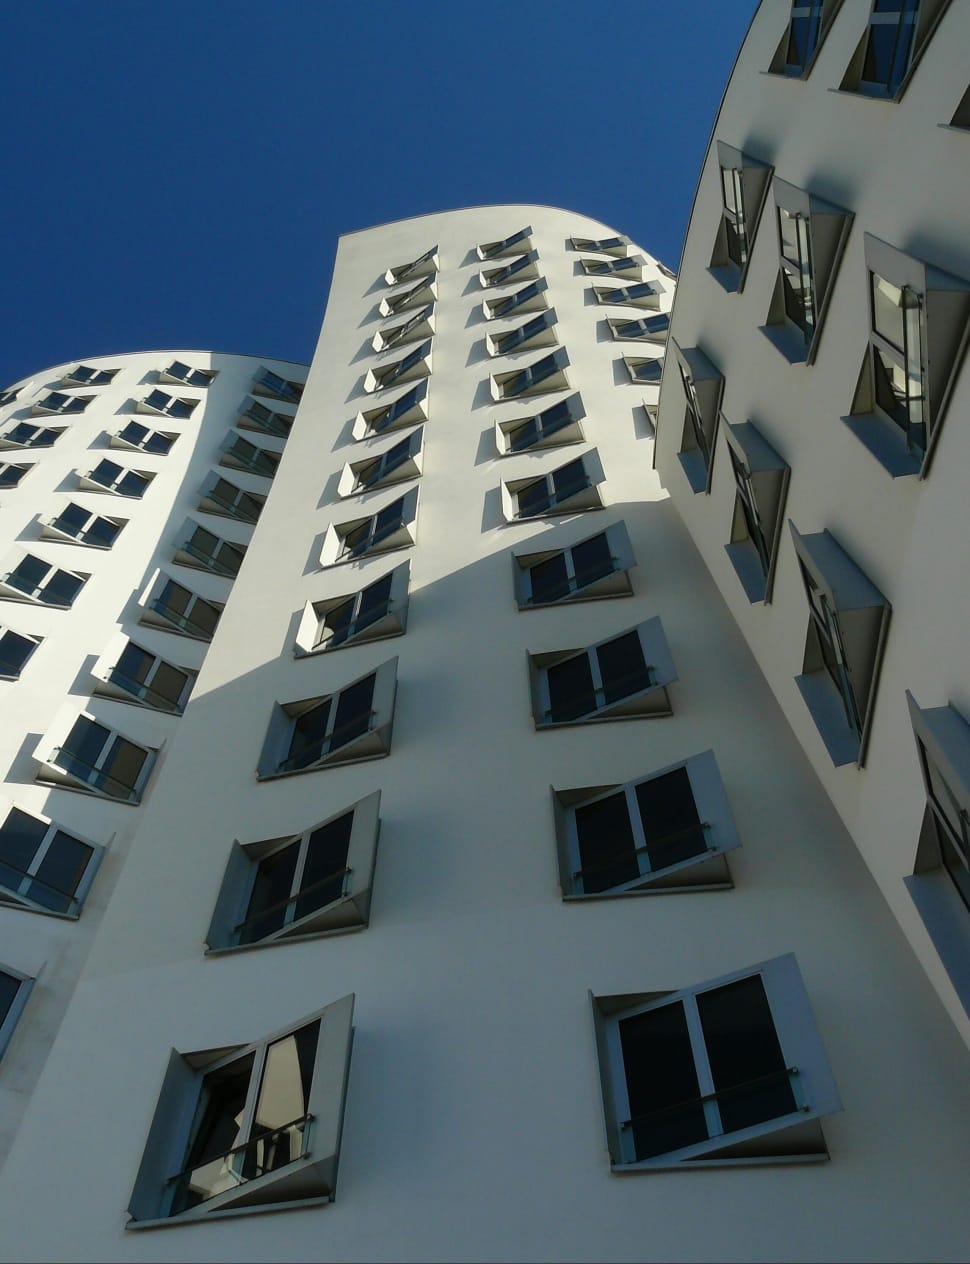 worm's eyeview photograph of white concrete building preview